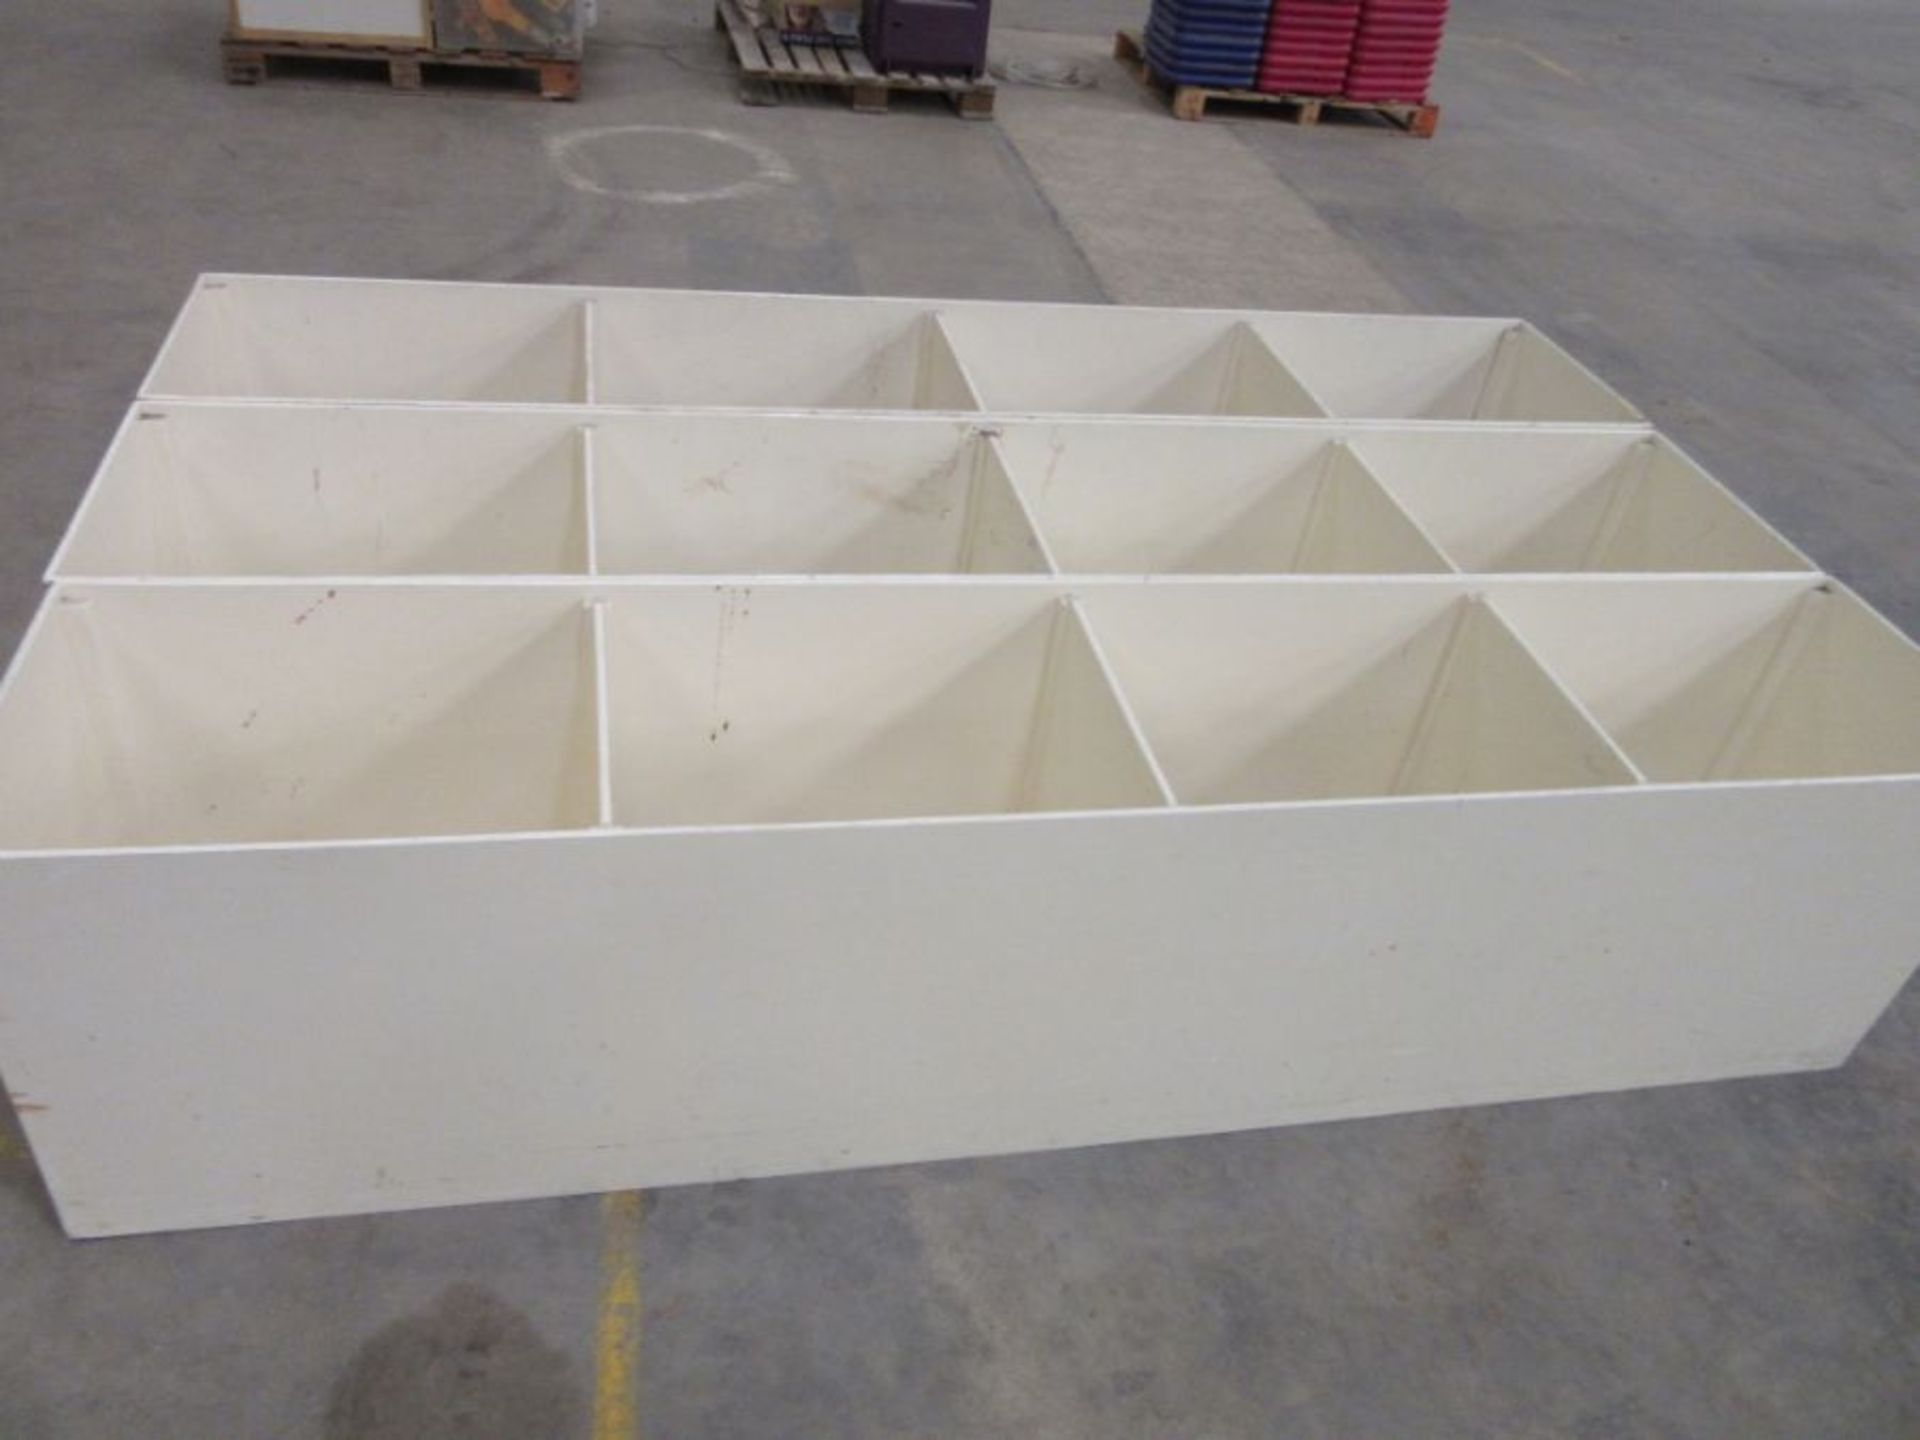 Three industrial painted shelving units